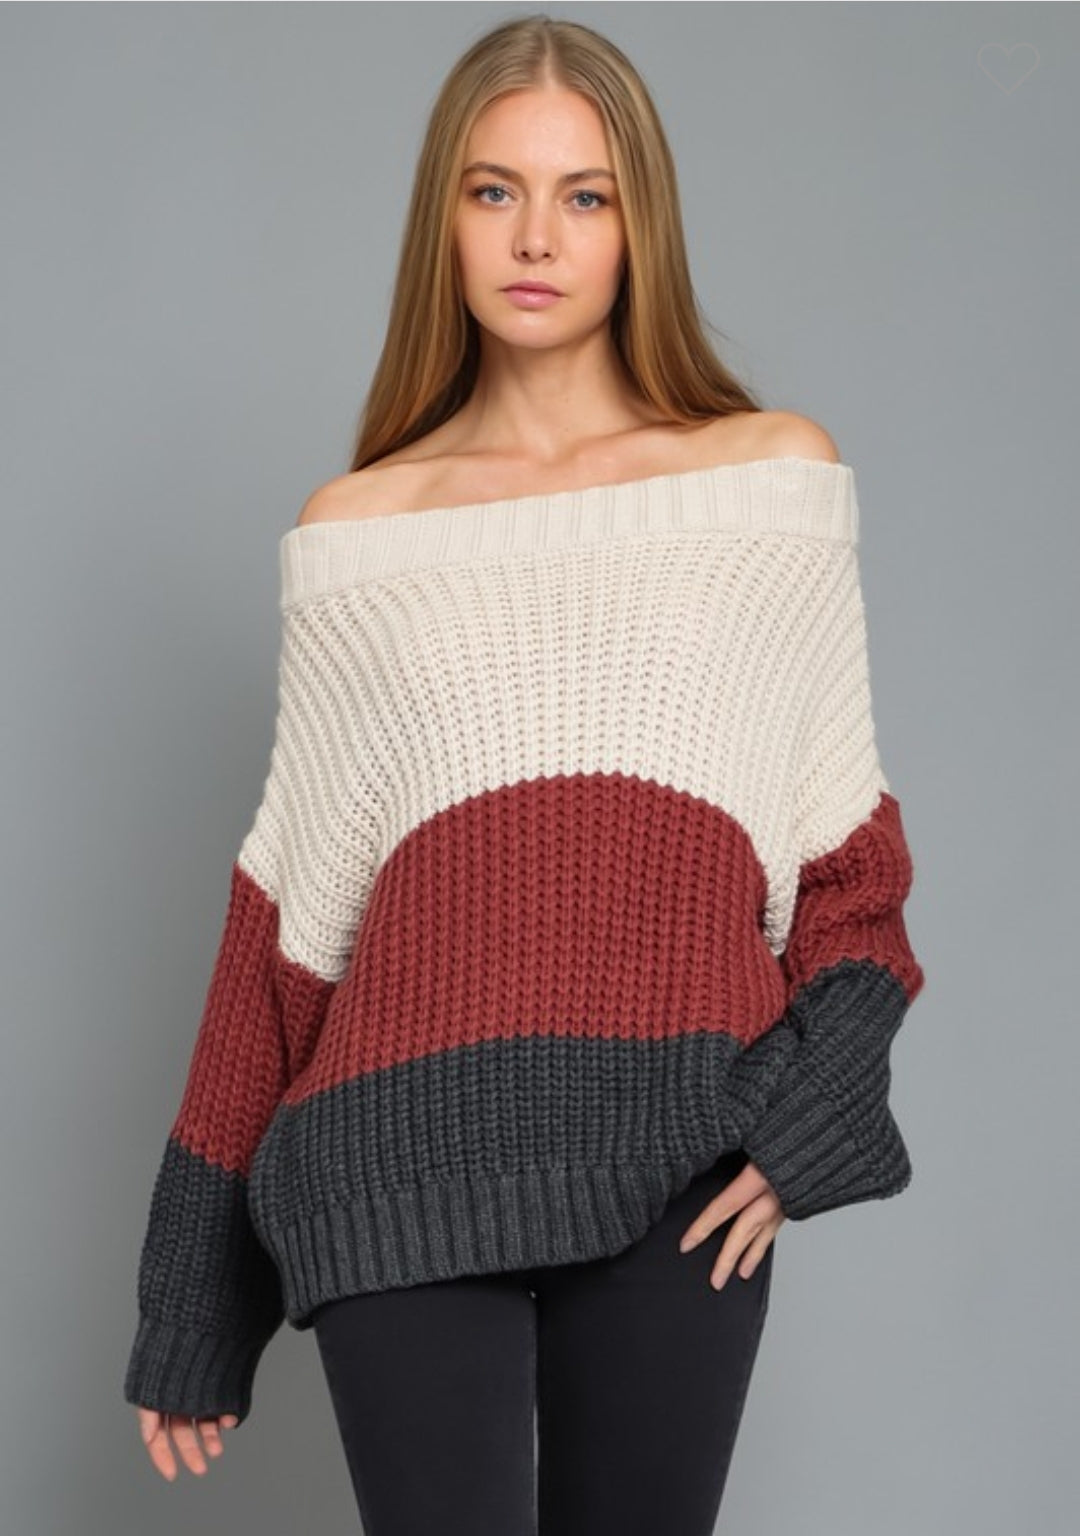 Cozy slouch sweater